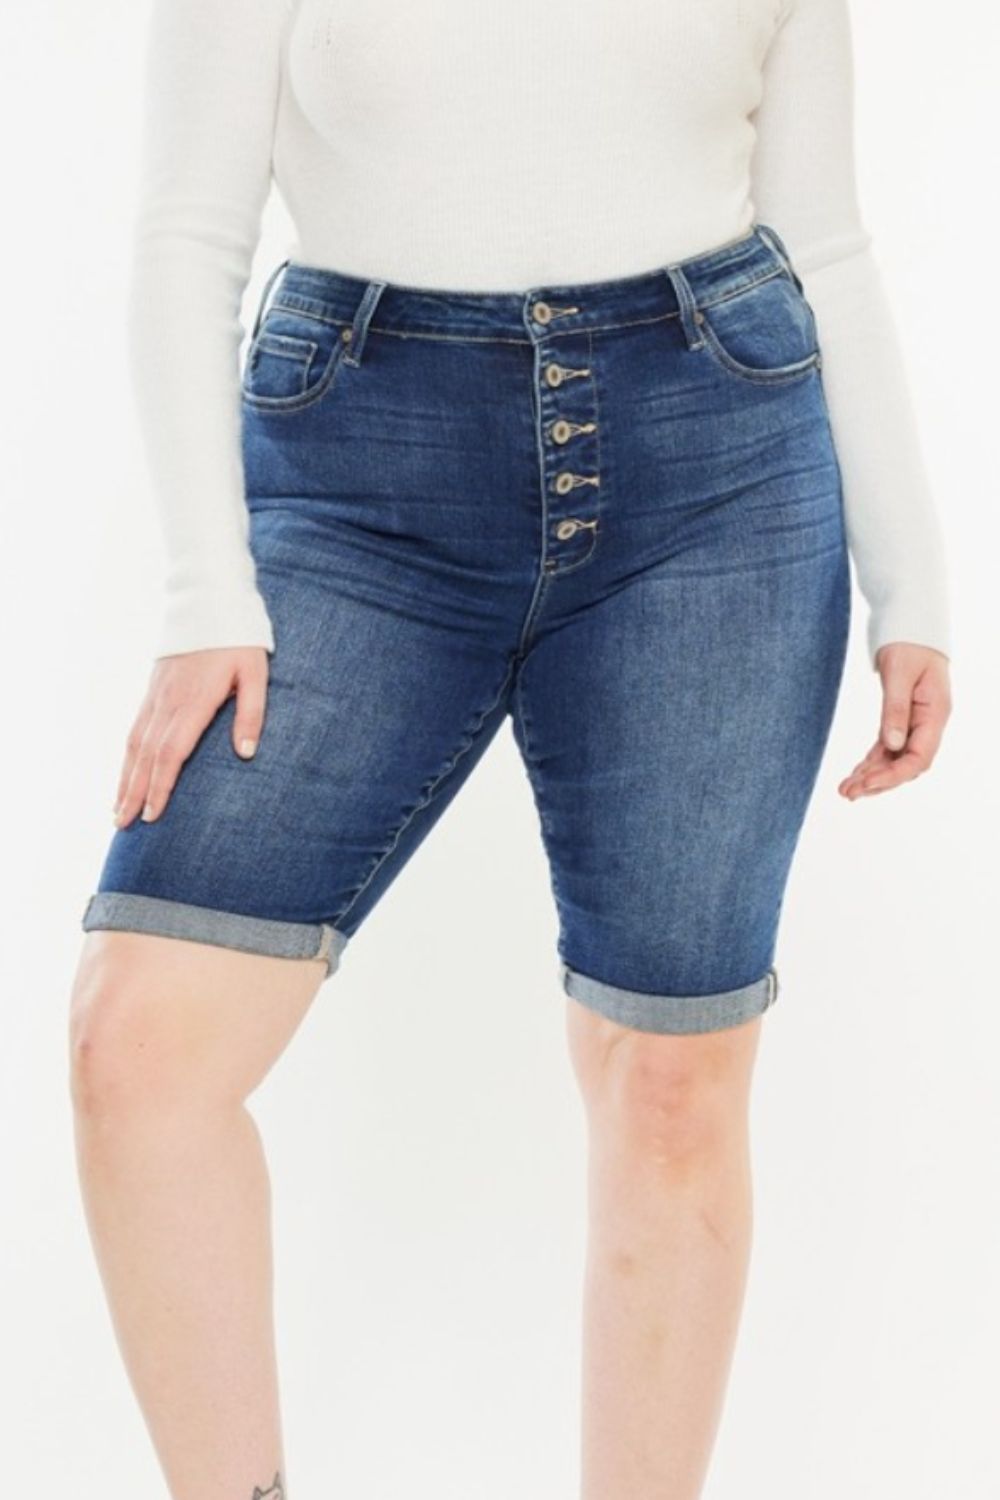 Women's Full Size Cat's Whiskers Button Fly Denim Shorts | Shorts | Ro + Ivy